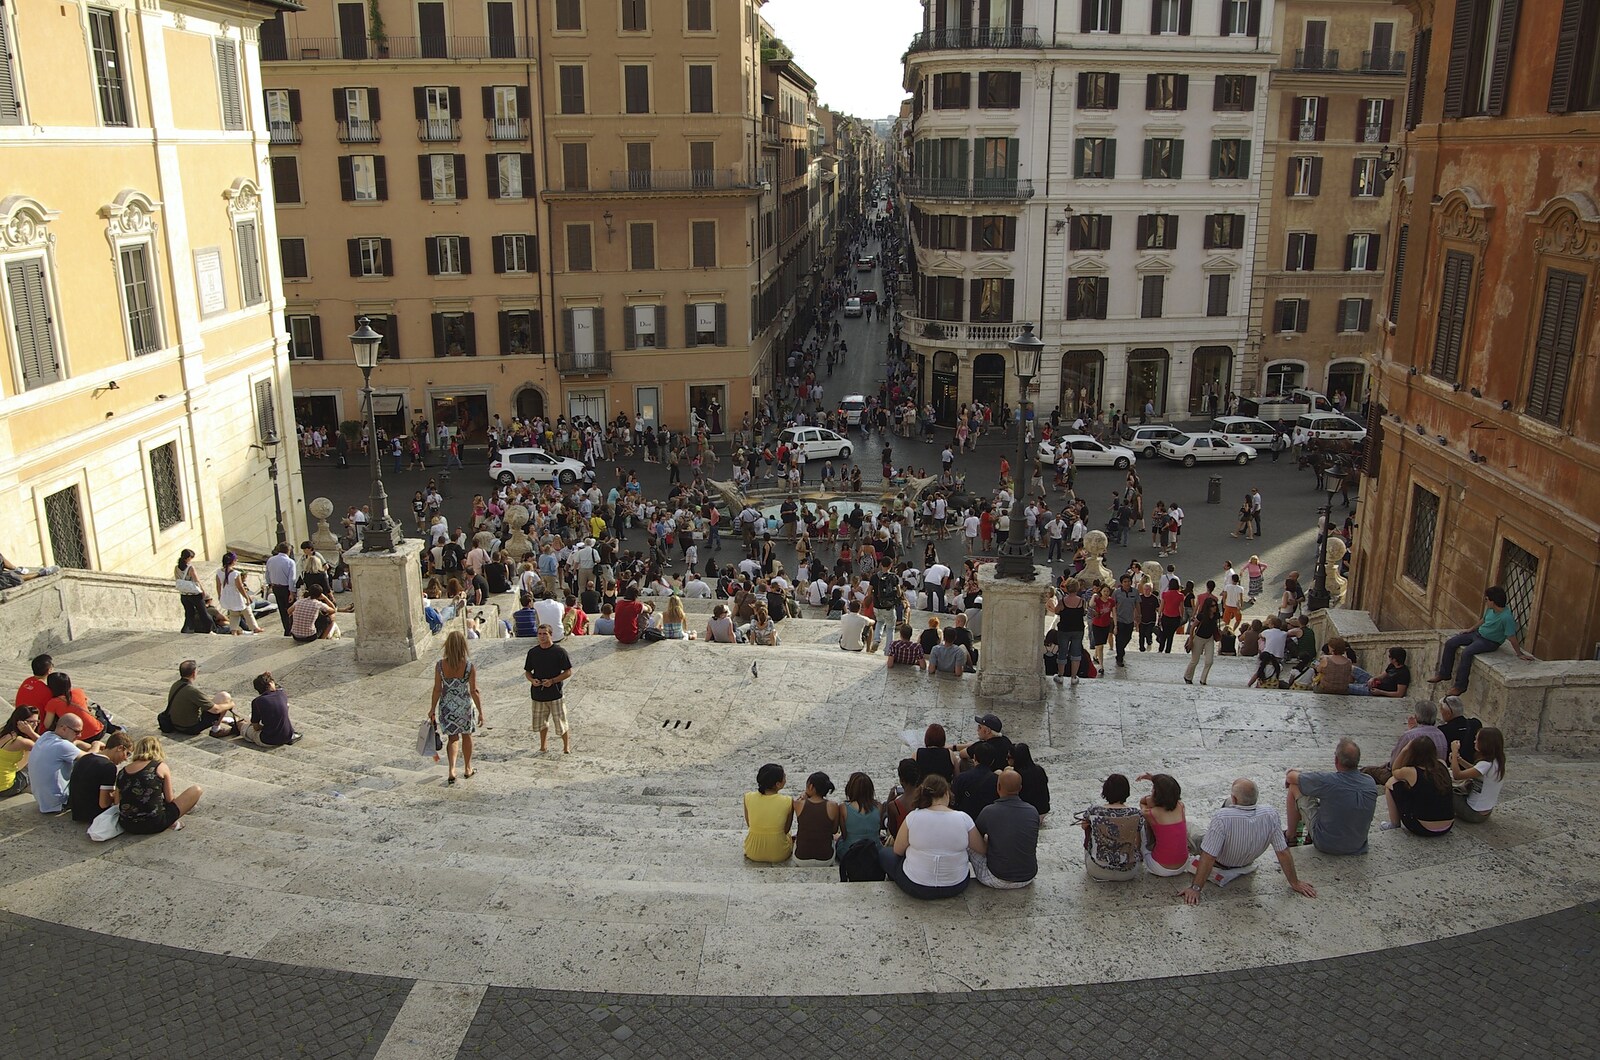 The view looking down the Spanish Steps from A Sojourn in The Eternal City, Rome, Italy - 22nd July 2008